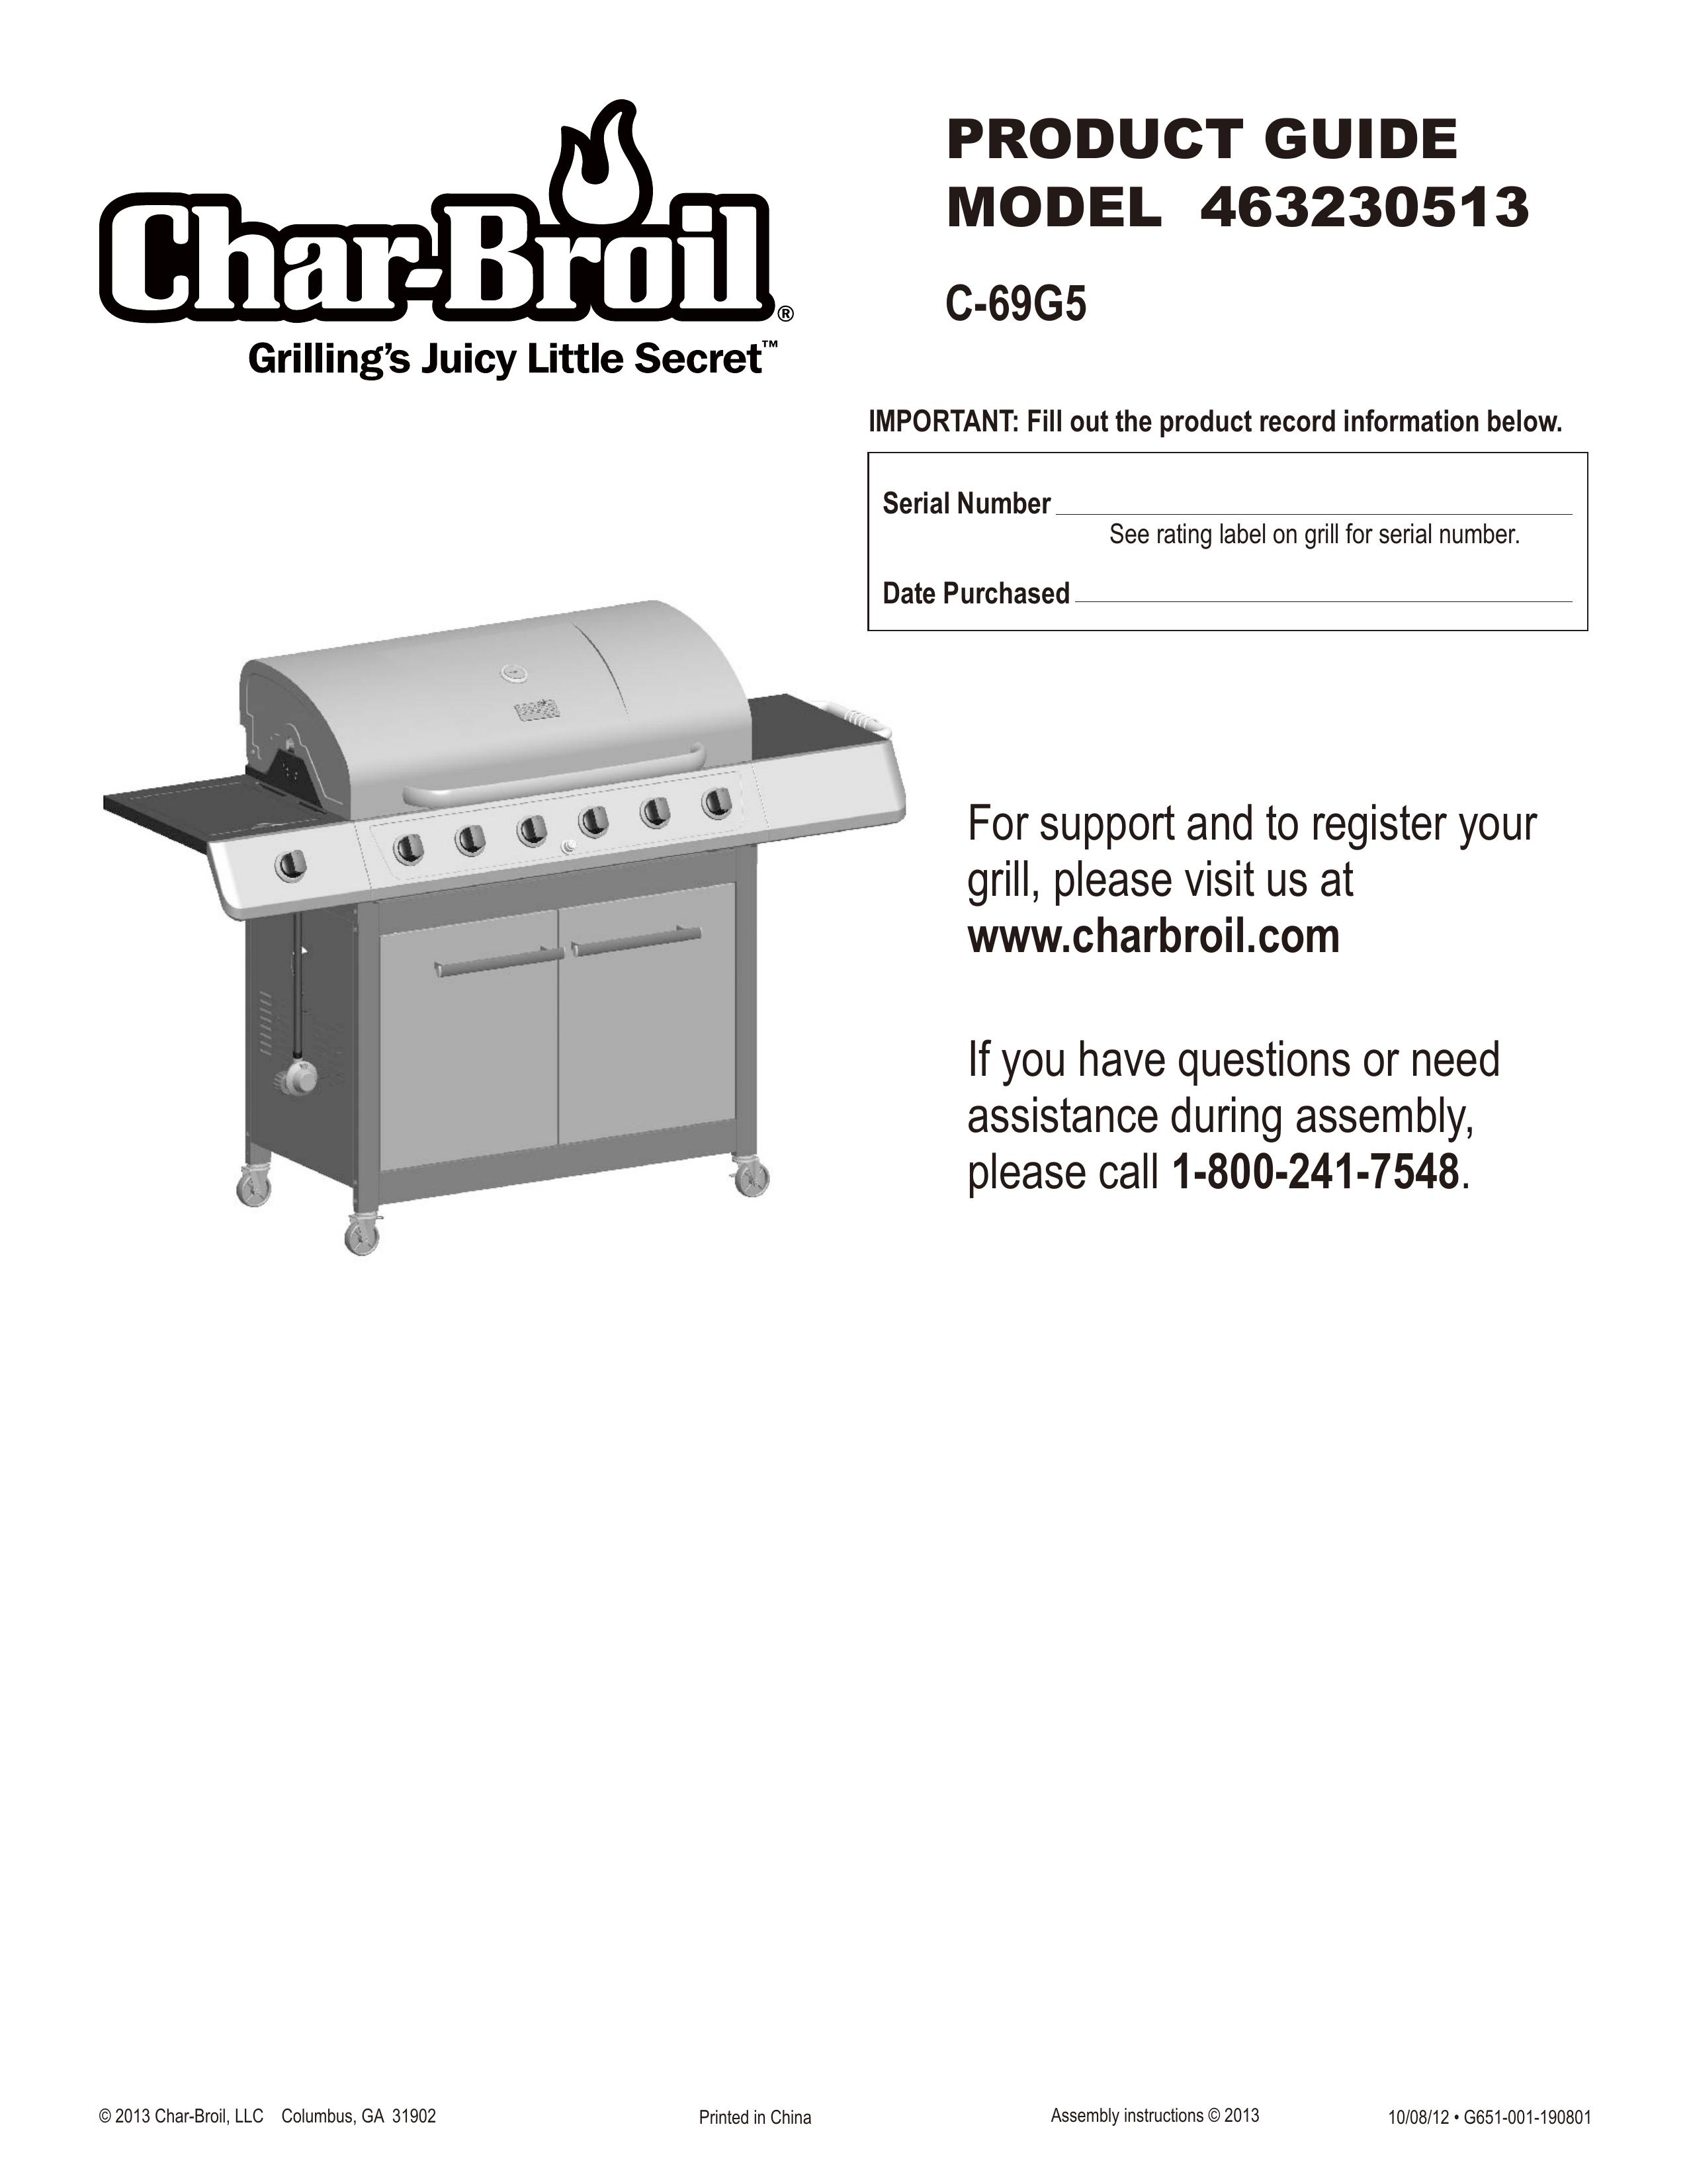 Char-Broil 463230513 Electric Grill User Manual (Page 1)